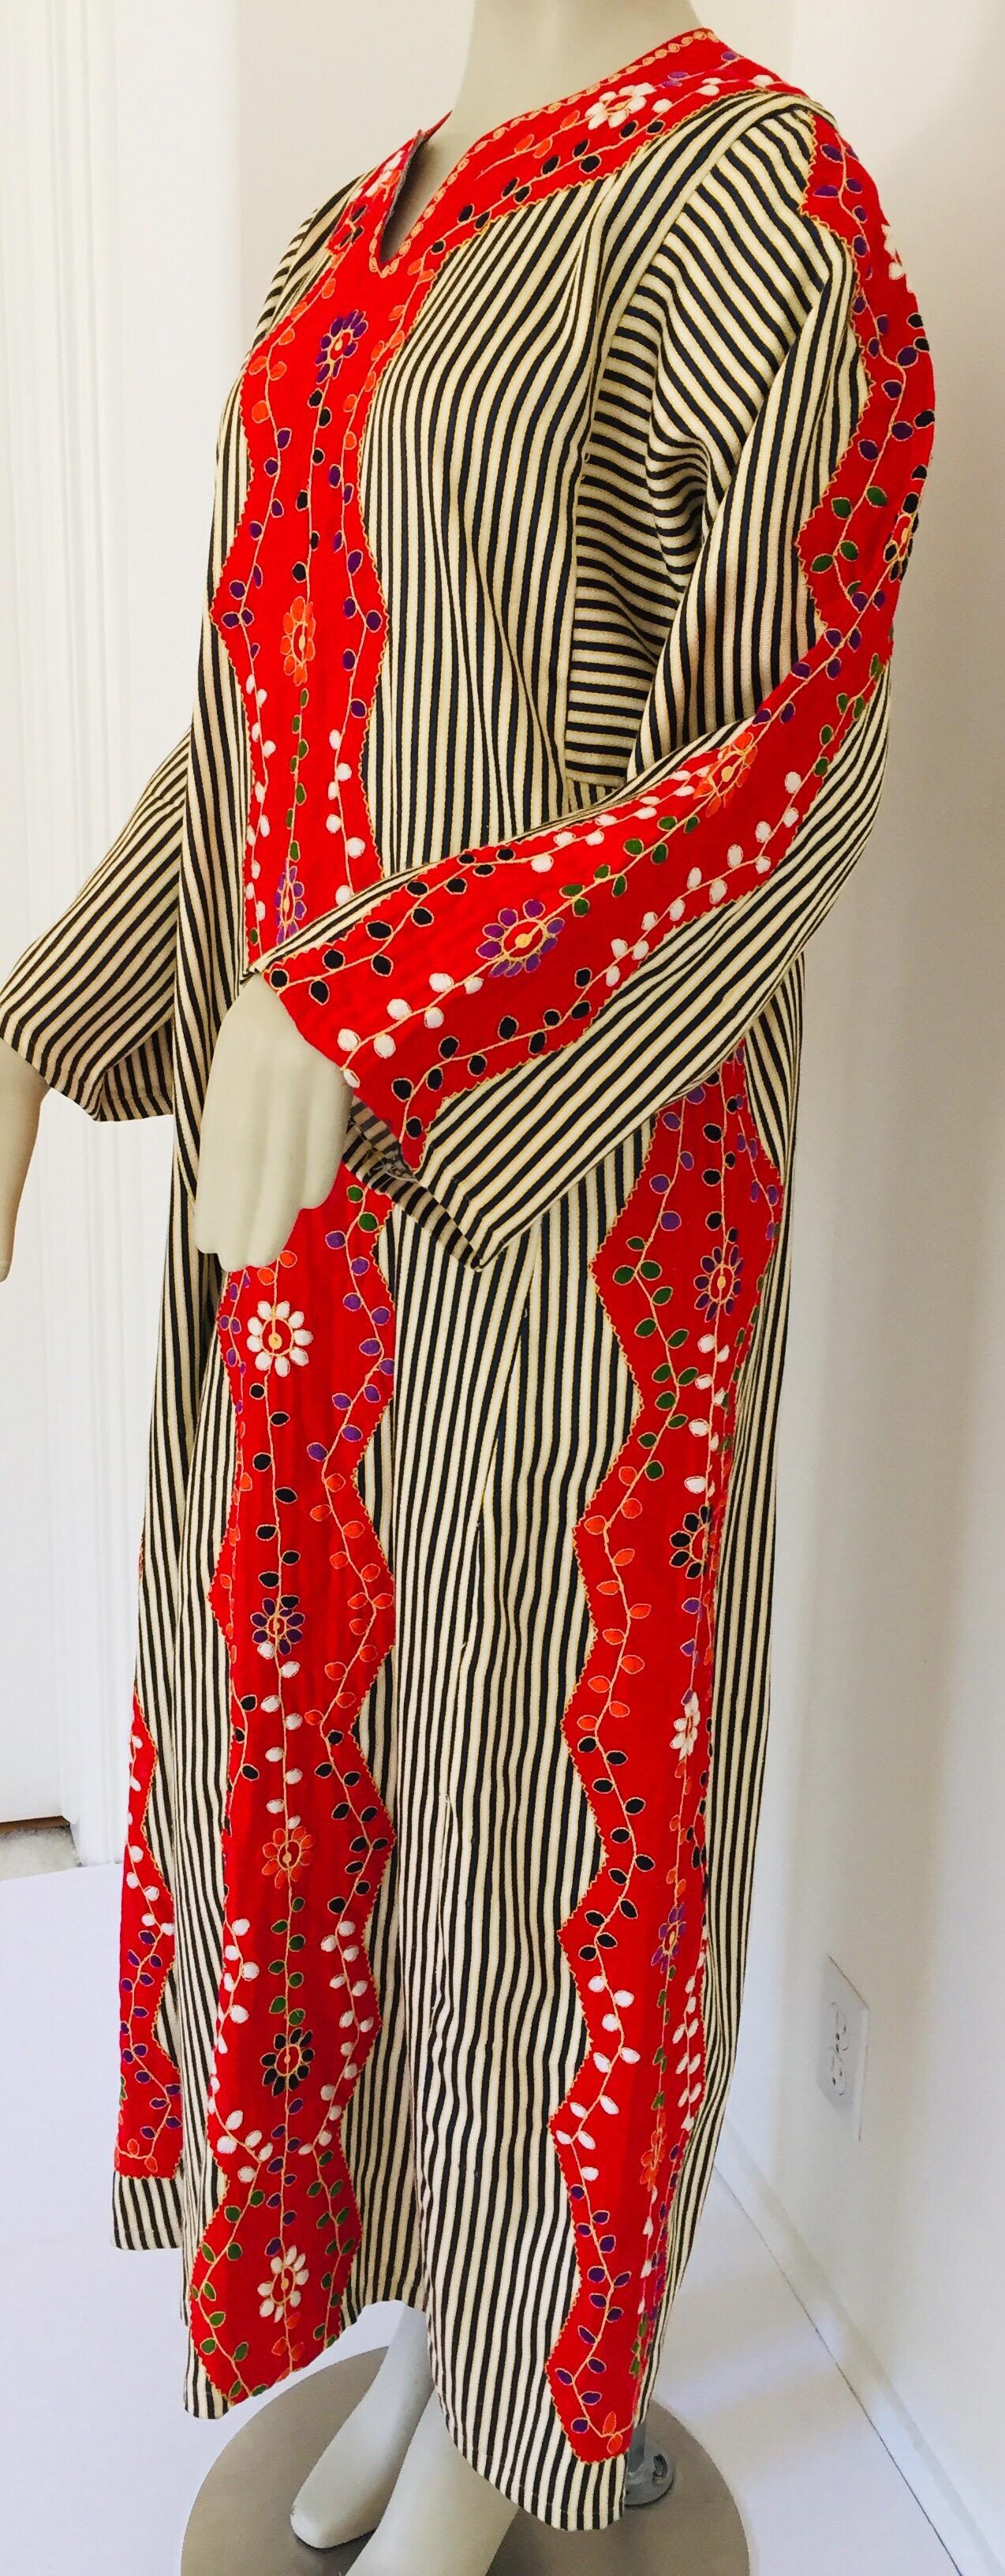 Hand-Crafted Vintage Middle Eastern Ethnic Caftan Moroccan Kaftan Maxi Dress For Sale